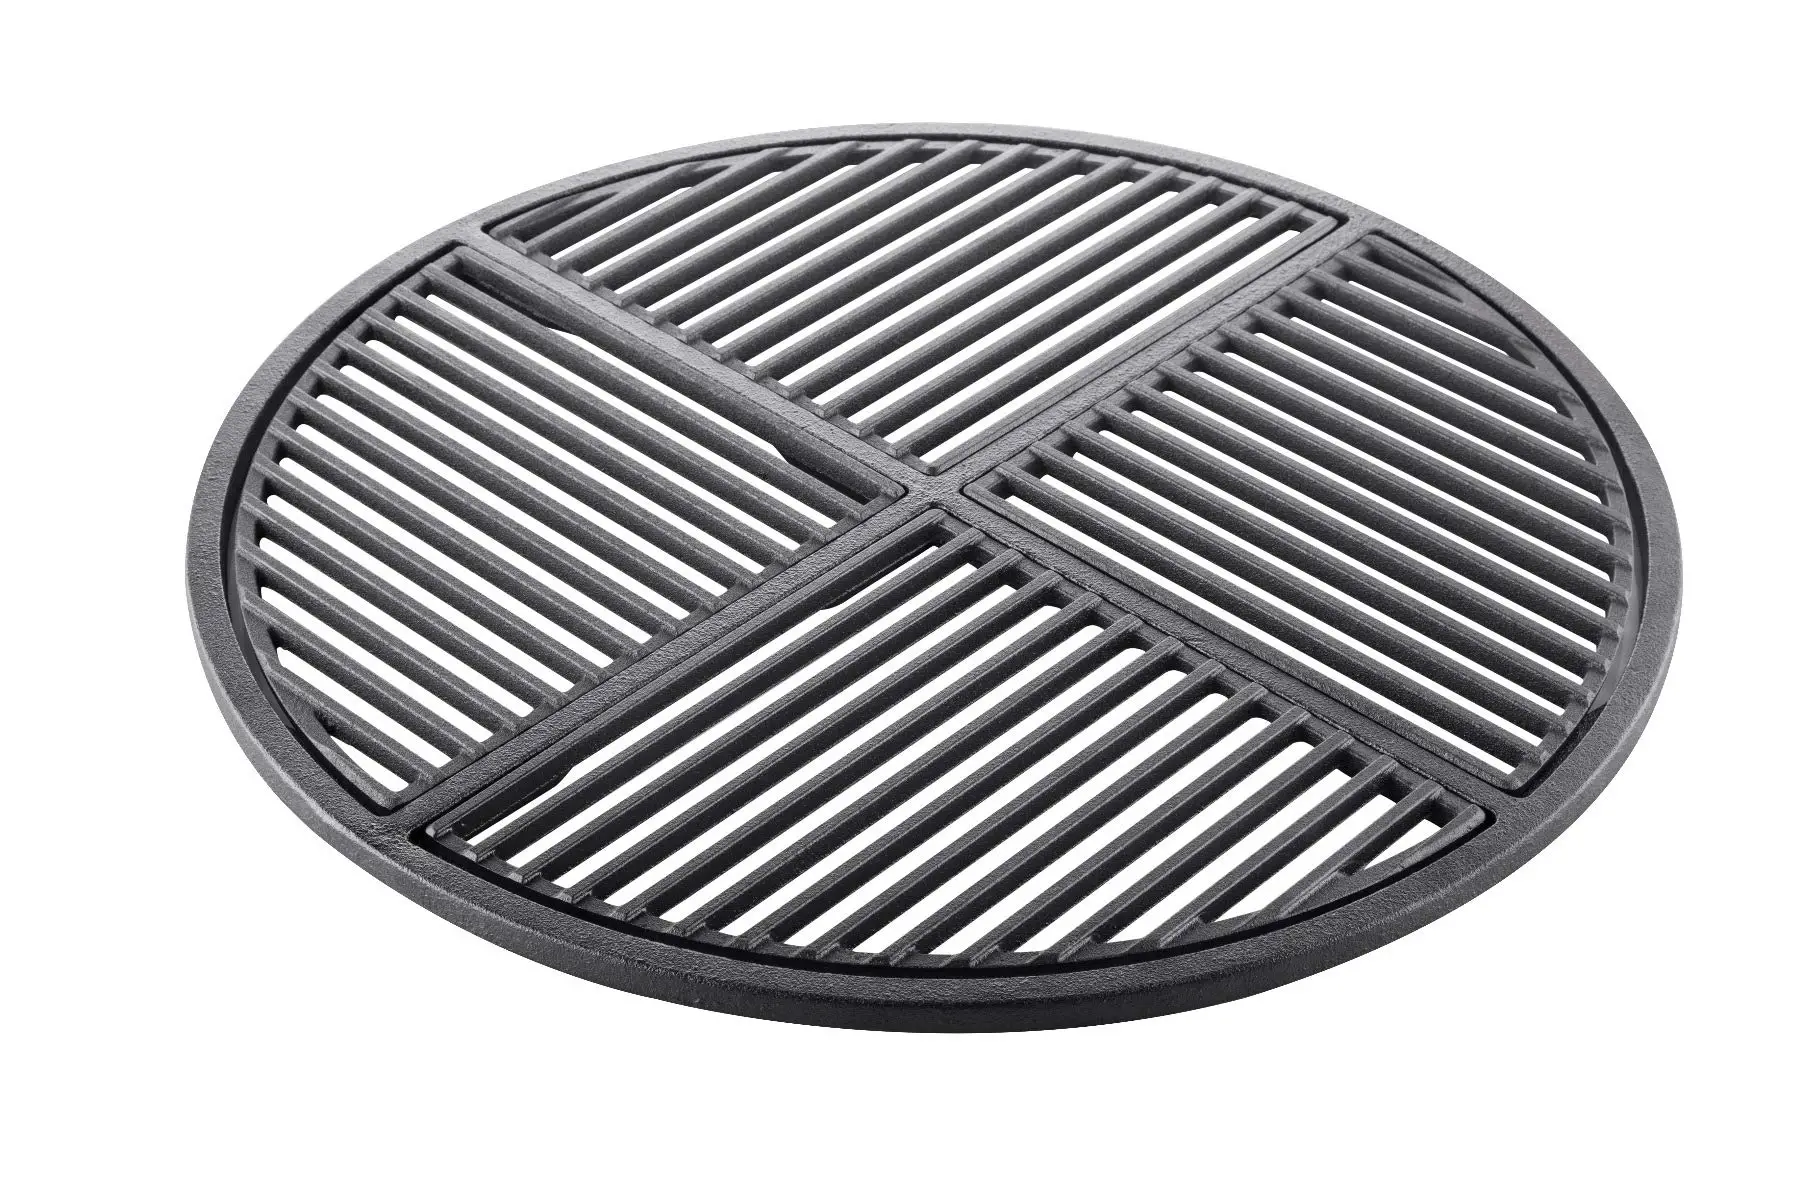 Cast Iron Grate, Pre Seasoned, Non Stick Cooking Surface, Modular Fits ...